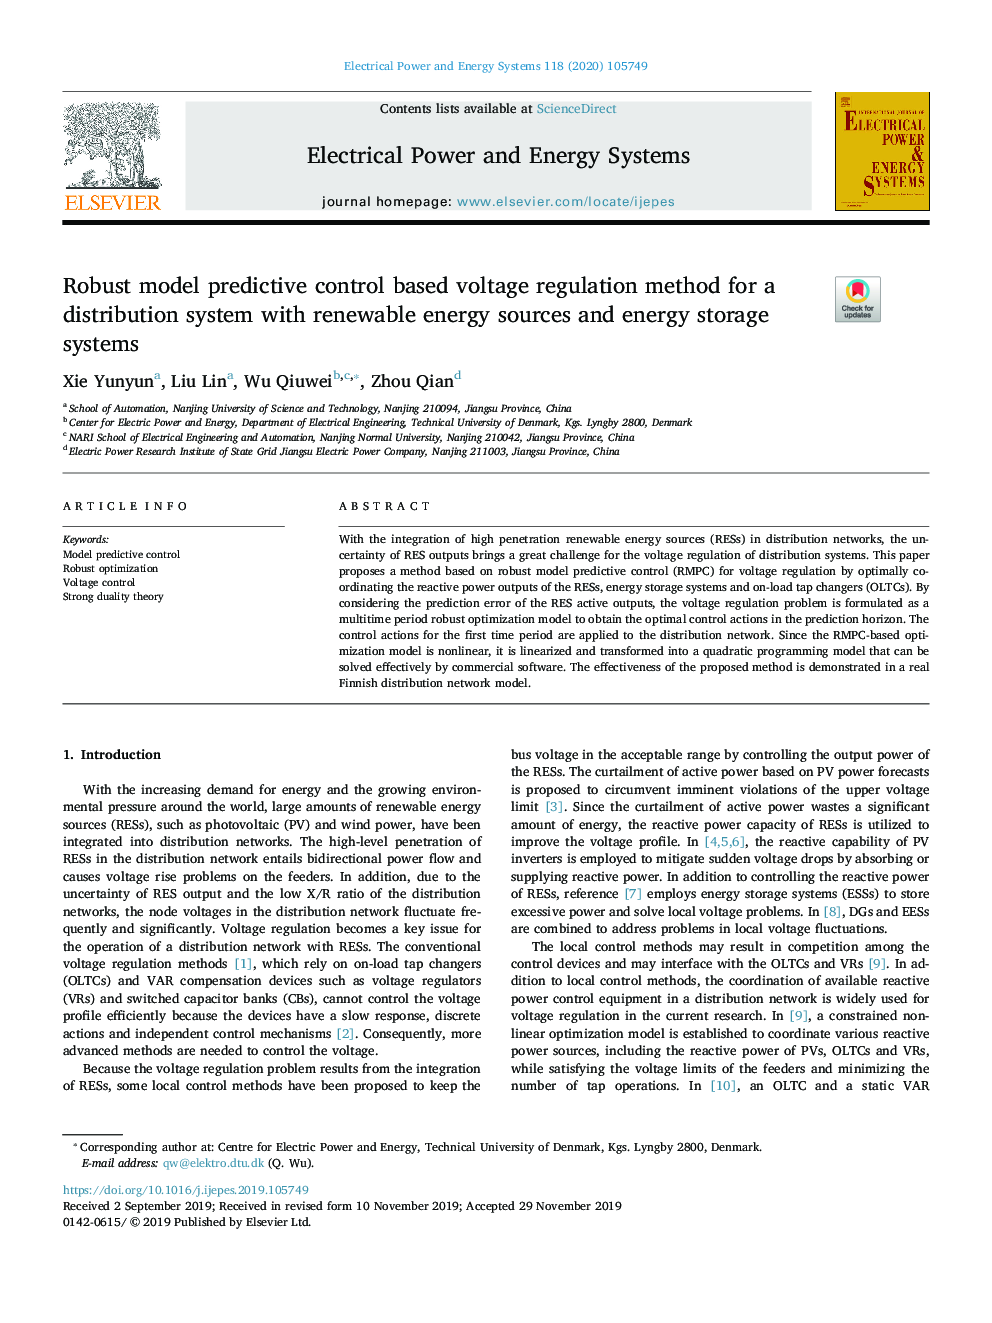 Robust model predictive control based voltage regulation method for a distribution system with renewable energy sources and energy storage systems